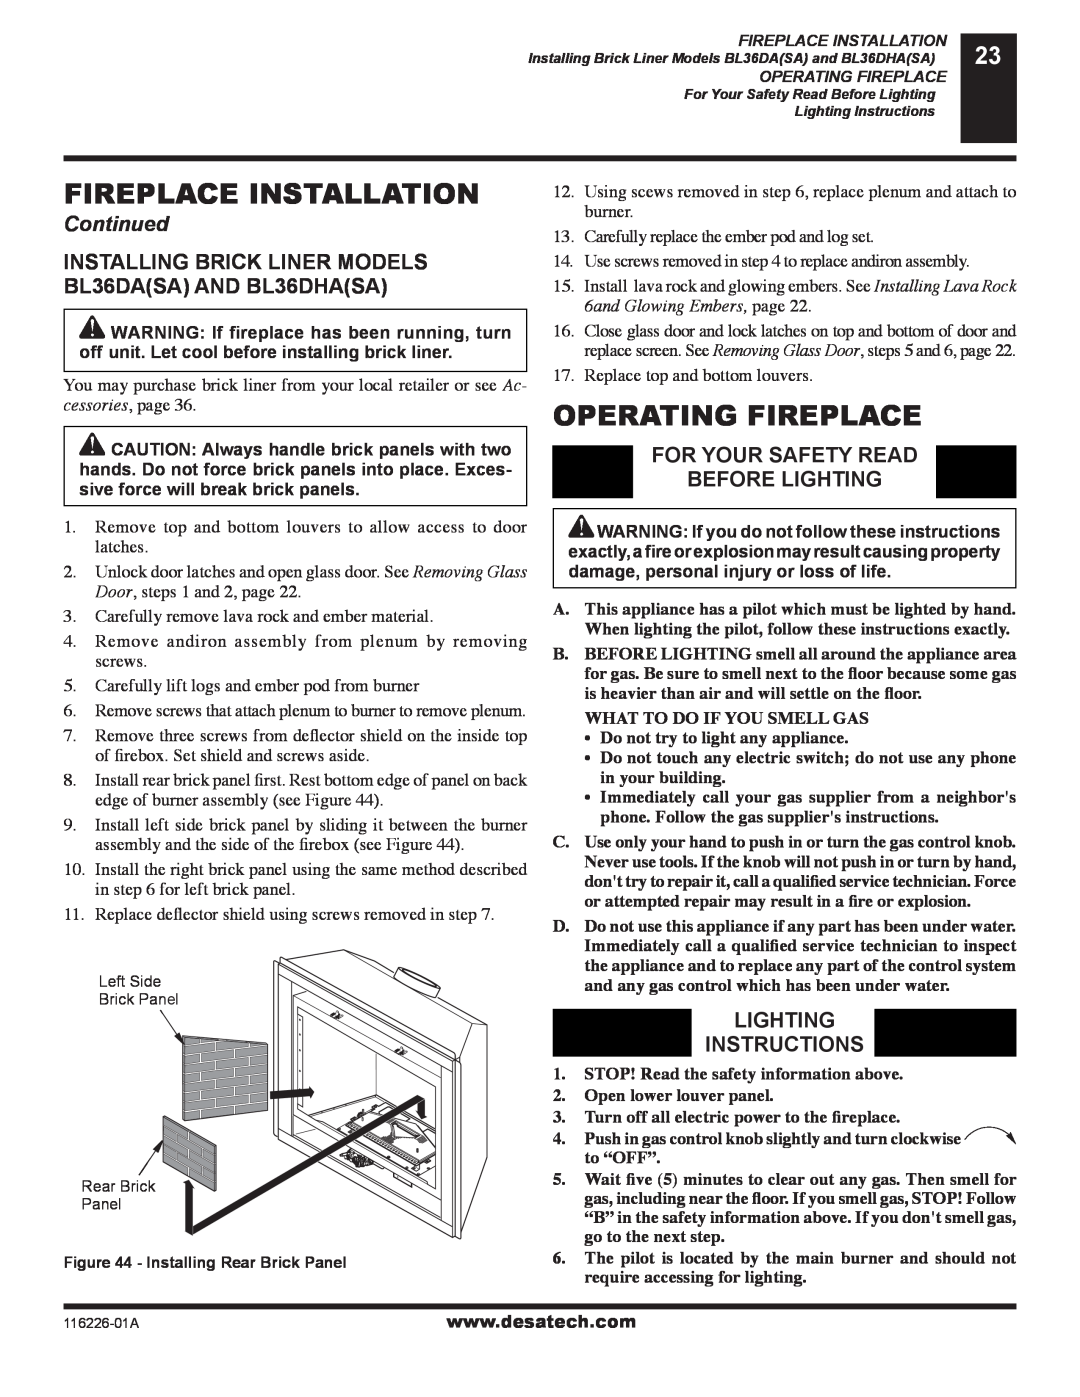 Desa (V)KC36P Operating Fireplace, For Your Safety Read Before Lighting, Lighting Instructions, Fireplace Installation 